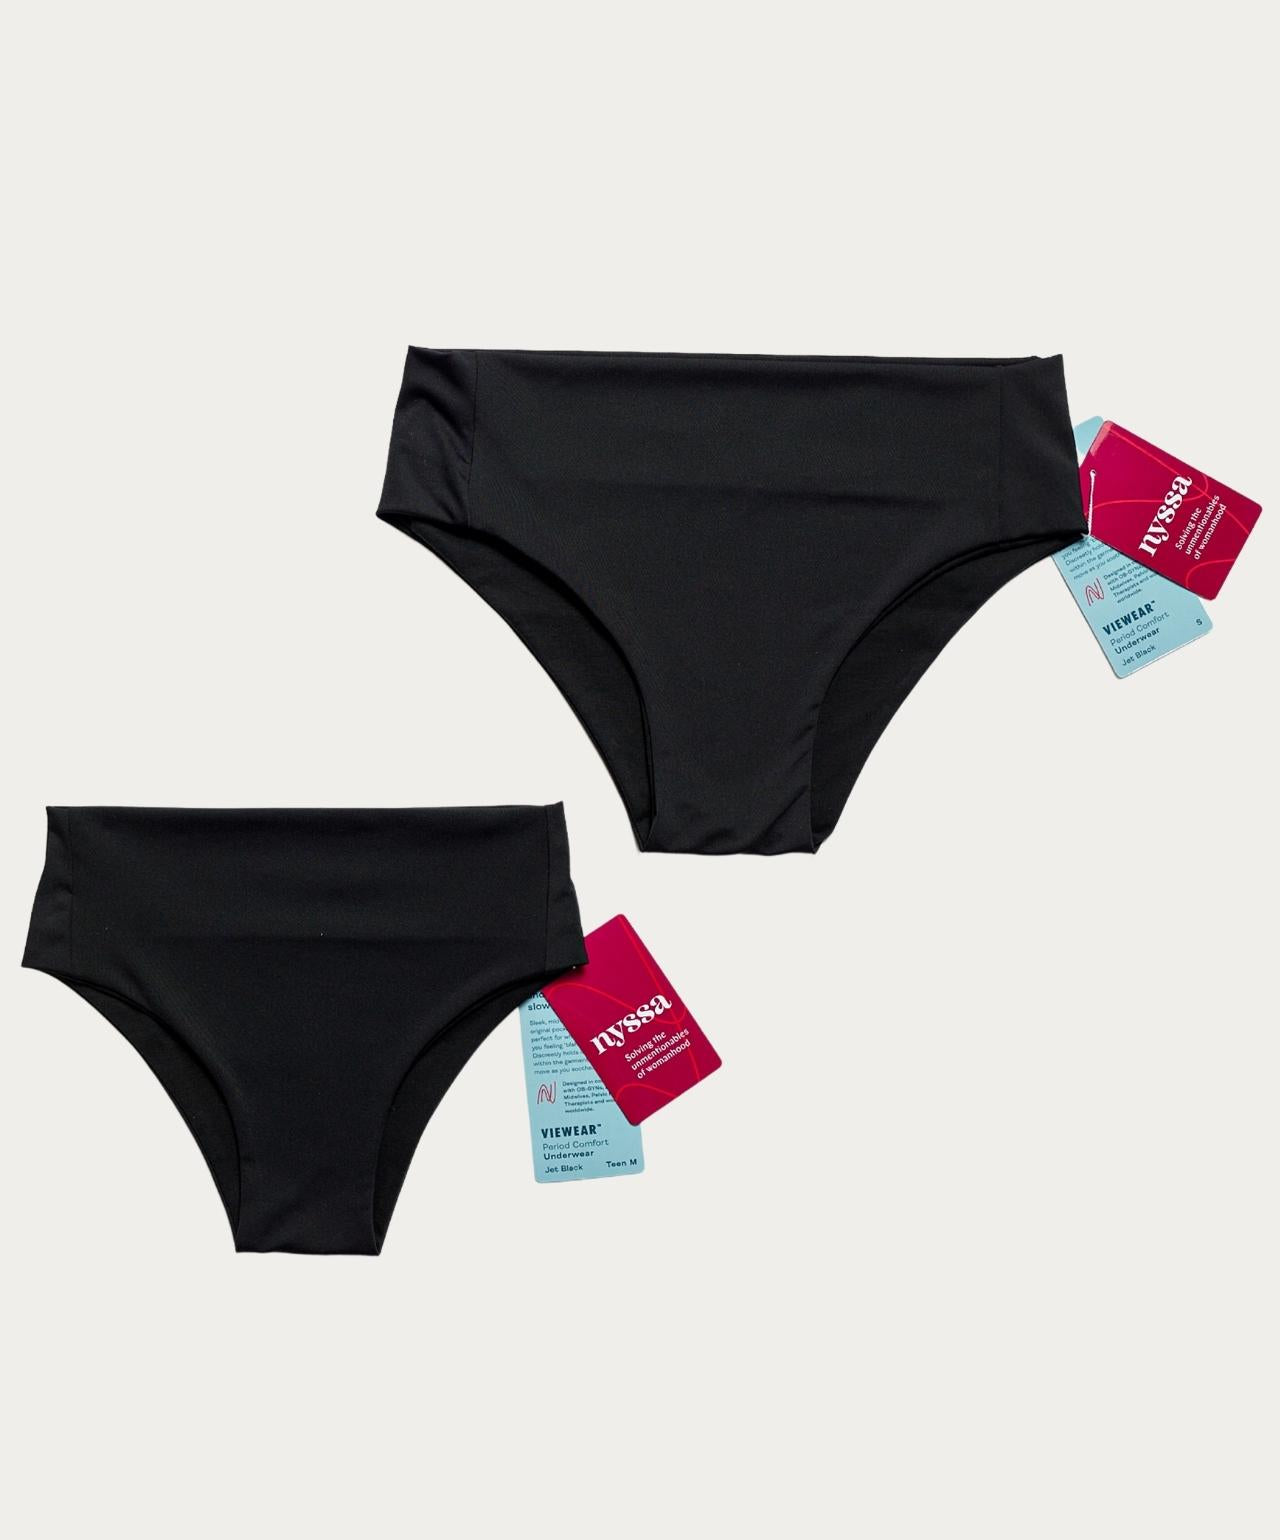 Teen and Adult Sizes of VieWear Underwear